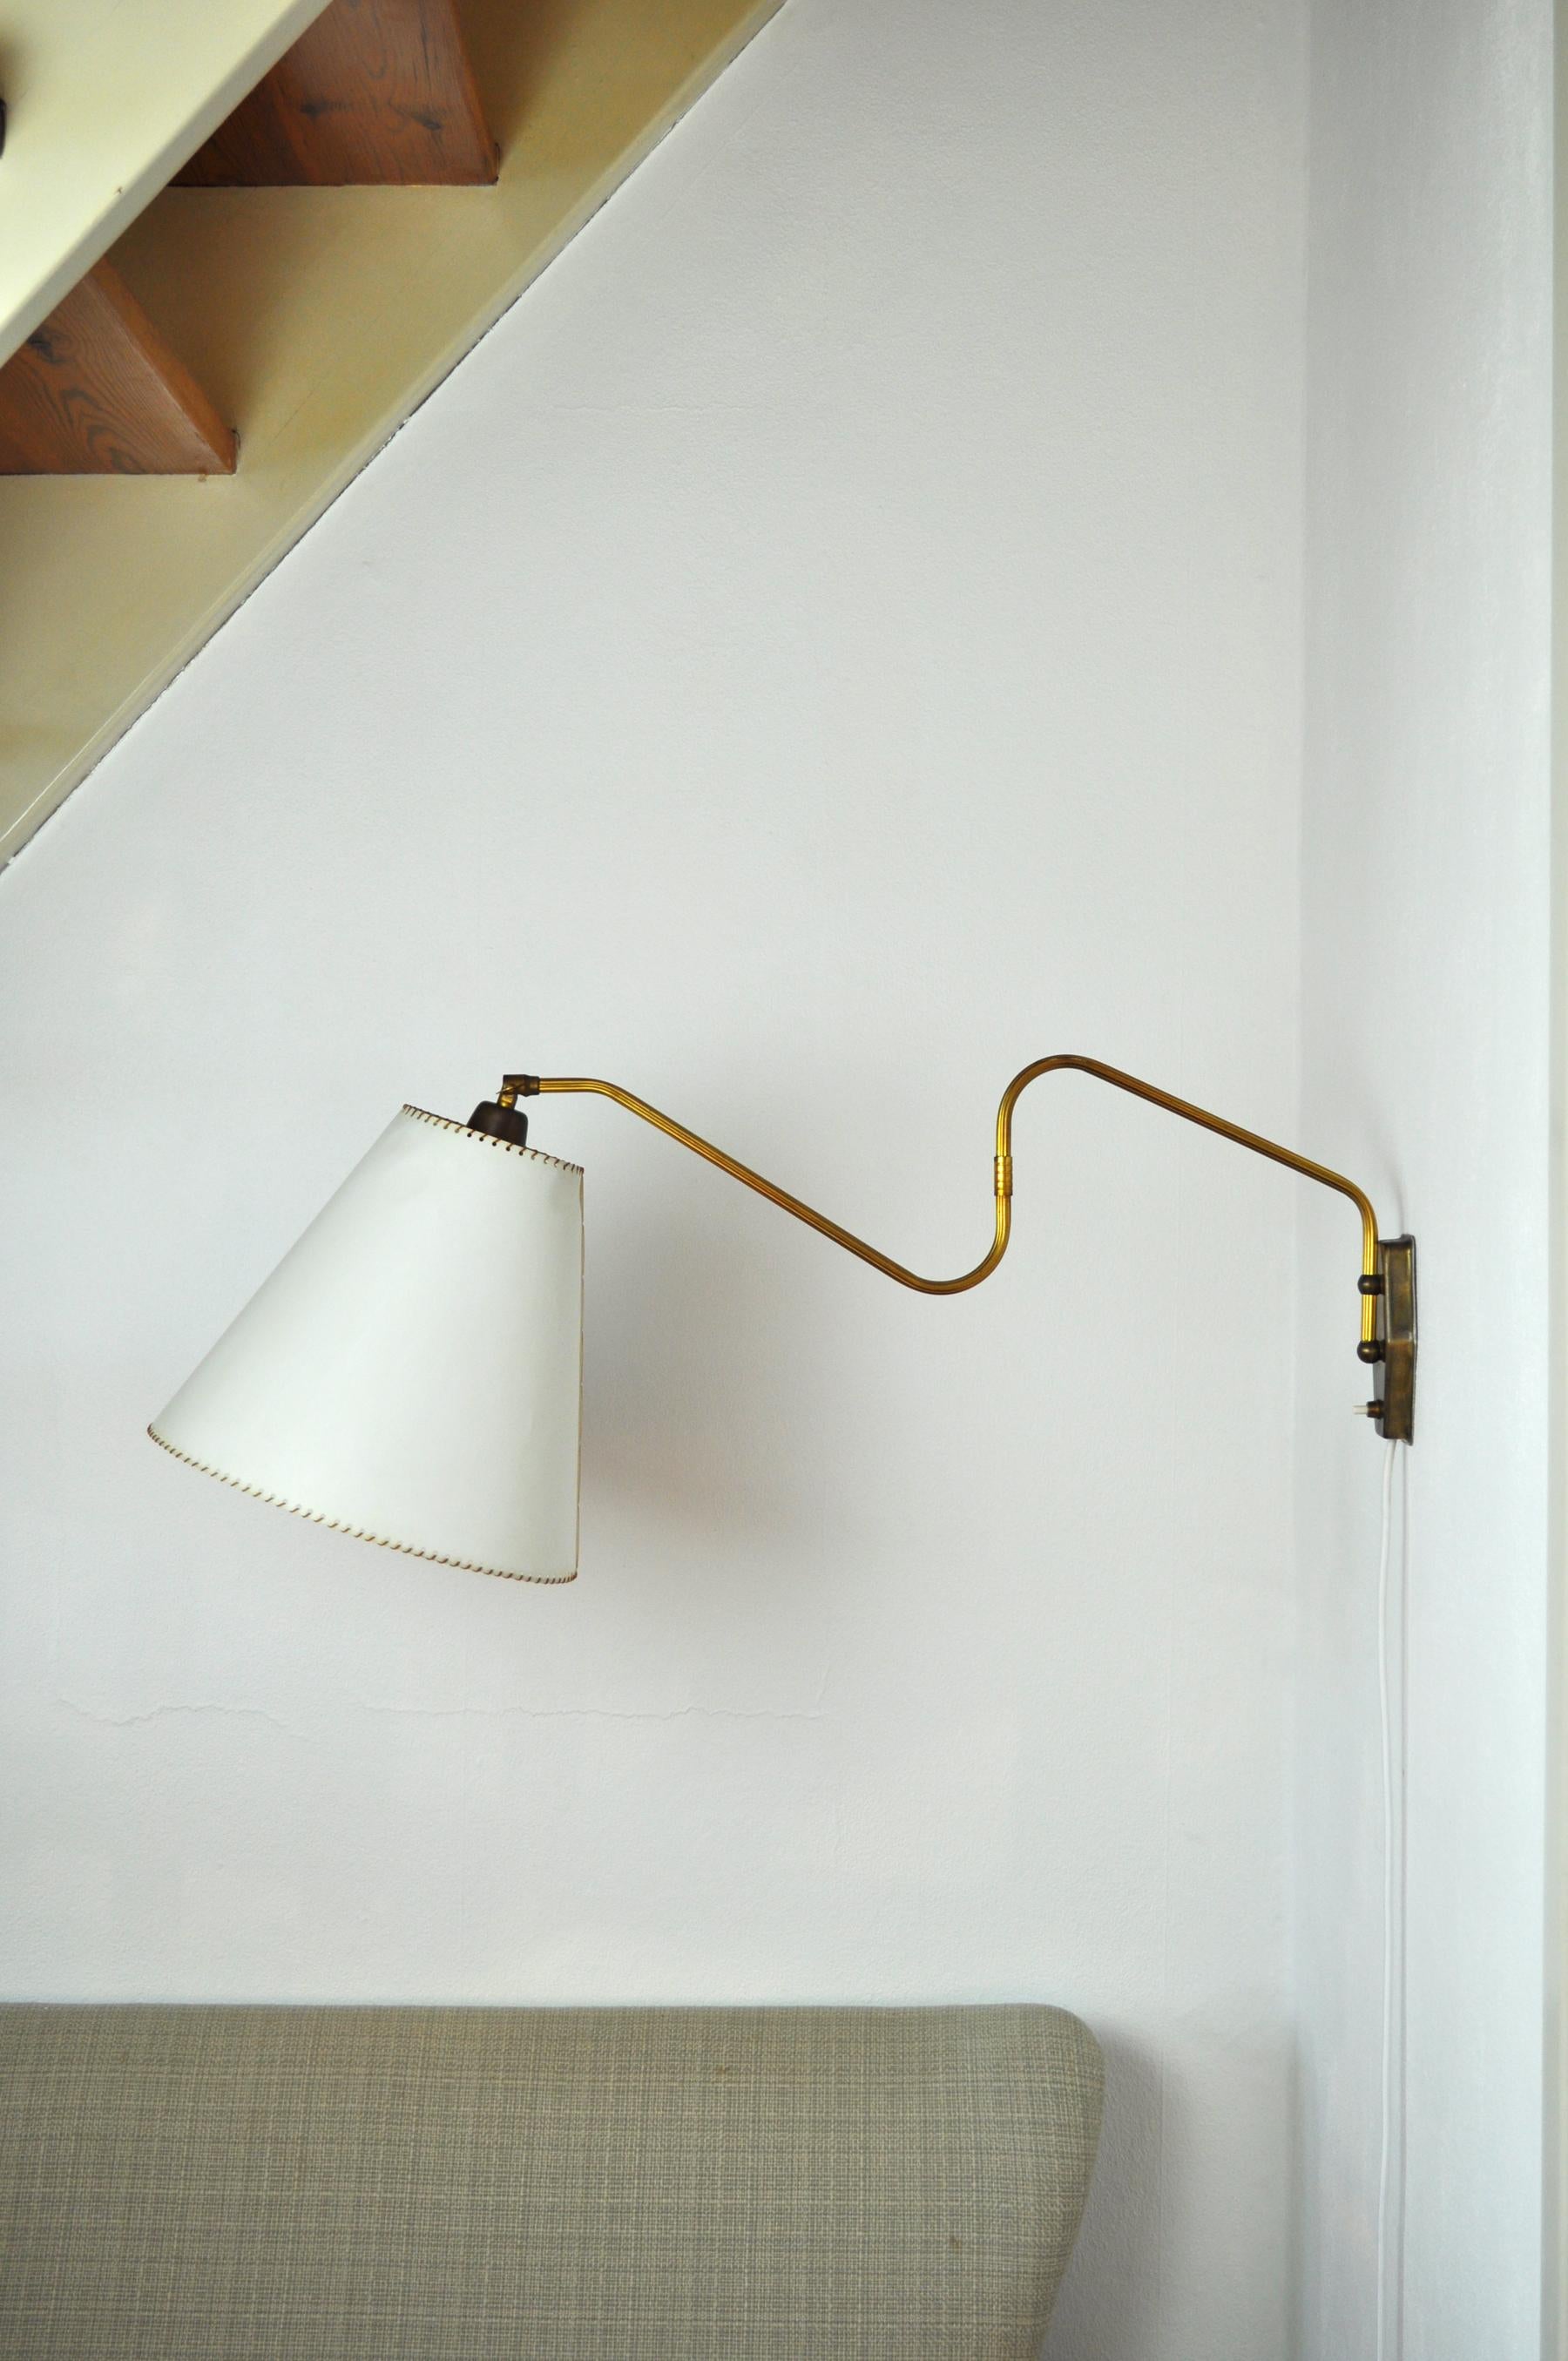 Brass wall lamp with two-piece swing arm and adjustable head.
Swivel and wall mount made in brass, mounted with original shade. 

Measures: Arm length incl. shade: circa 80 cm
Height ca. 40 cm 
Shade 11.5/29 cm, height 25 cm

Condition: Good